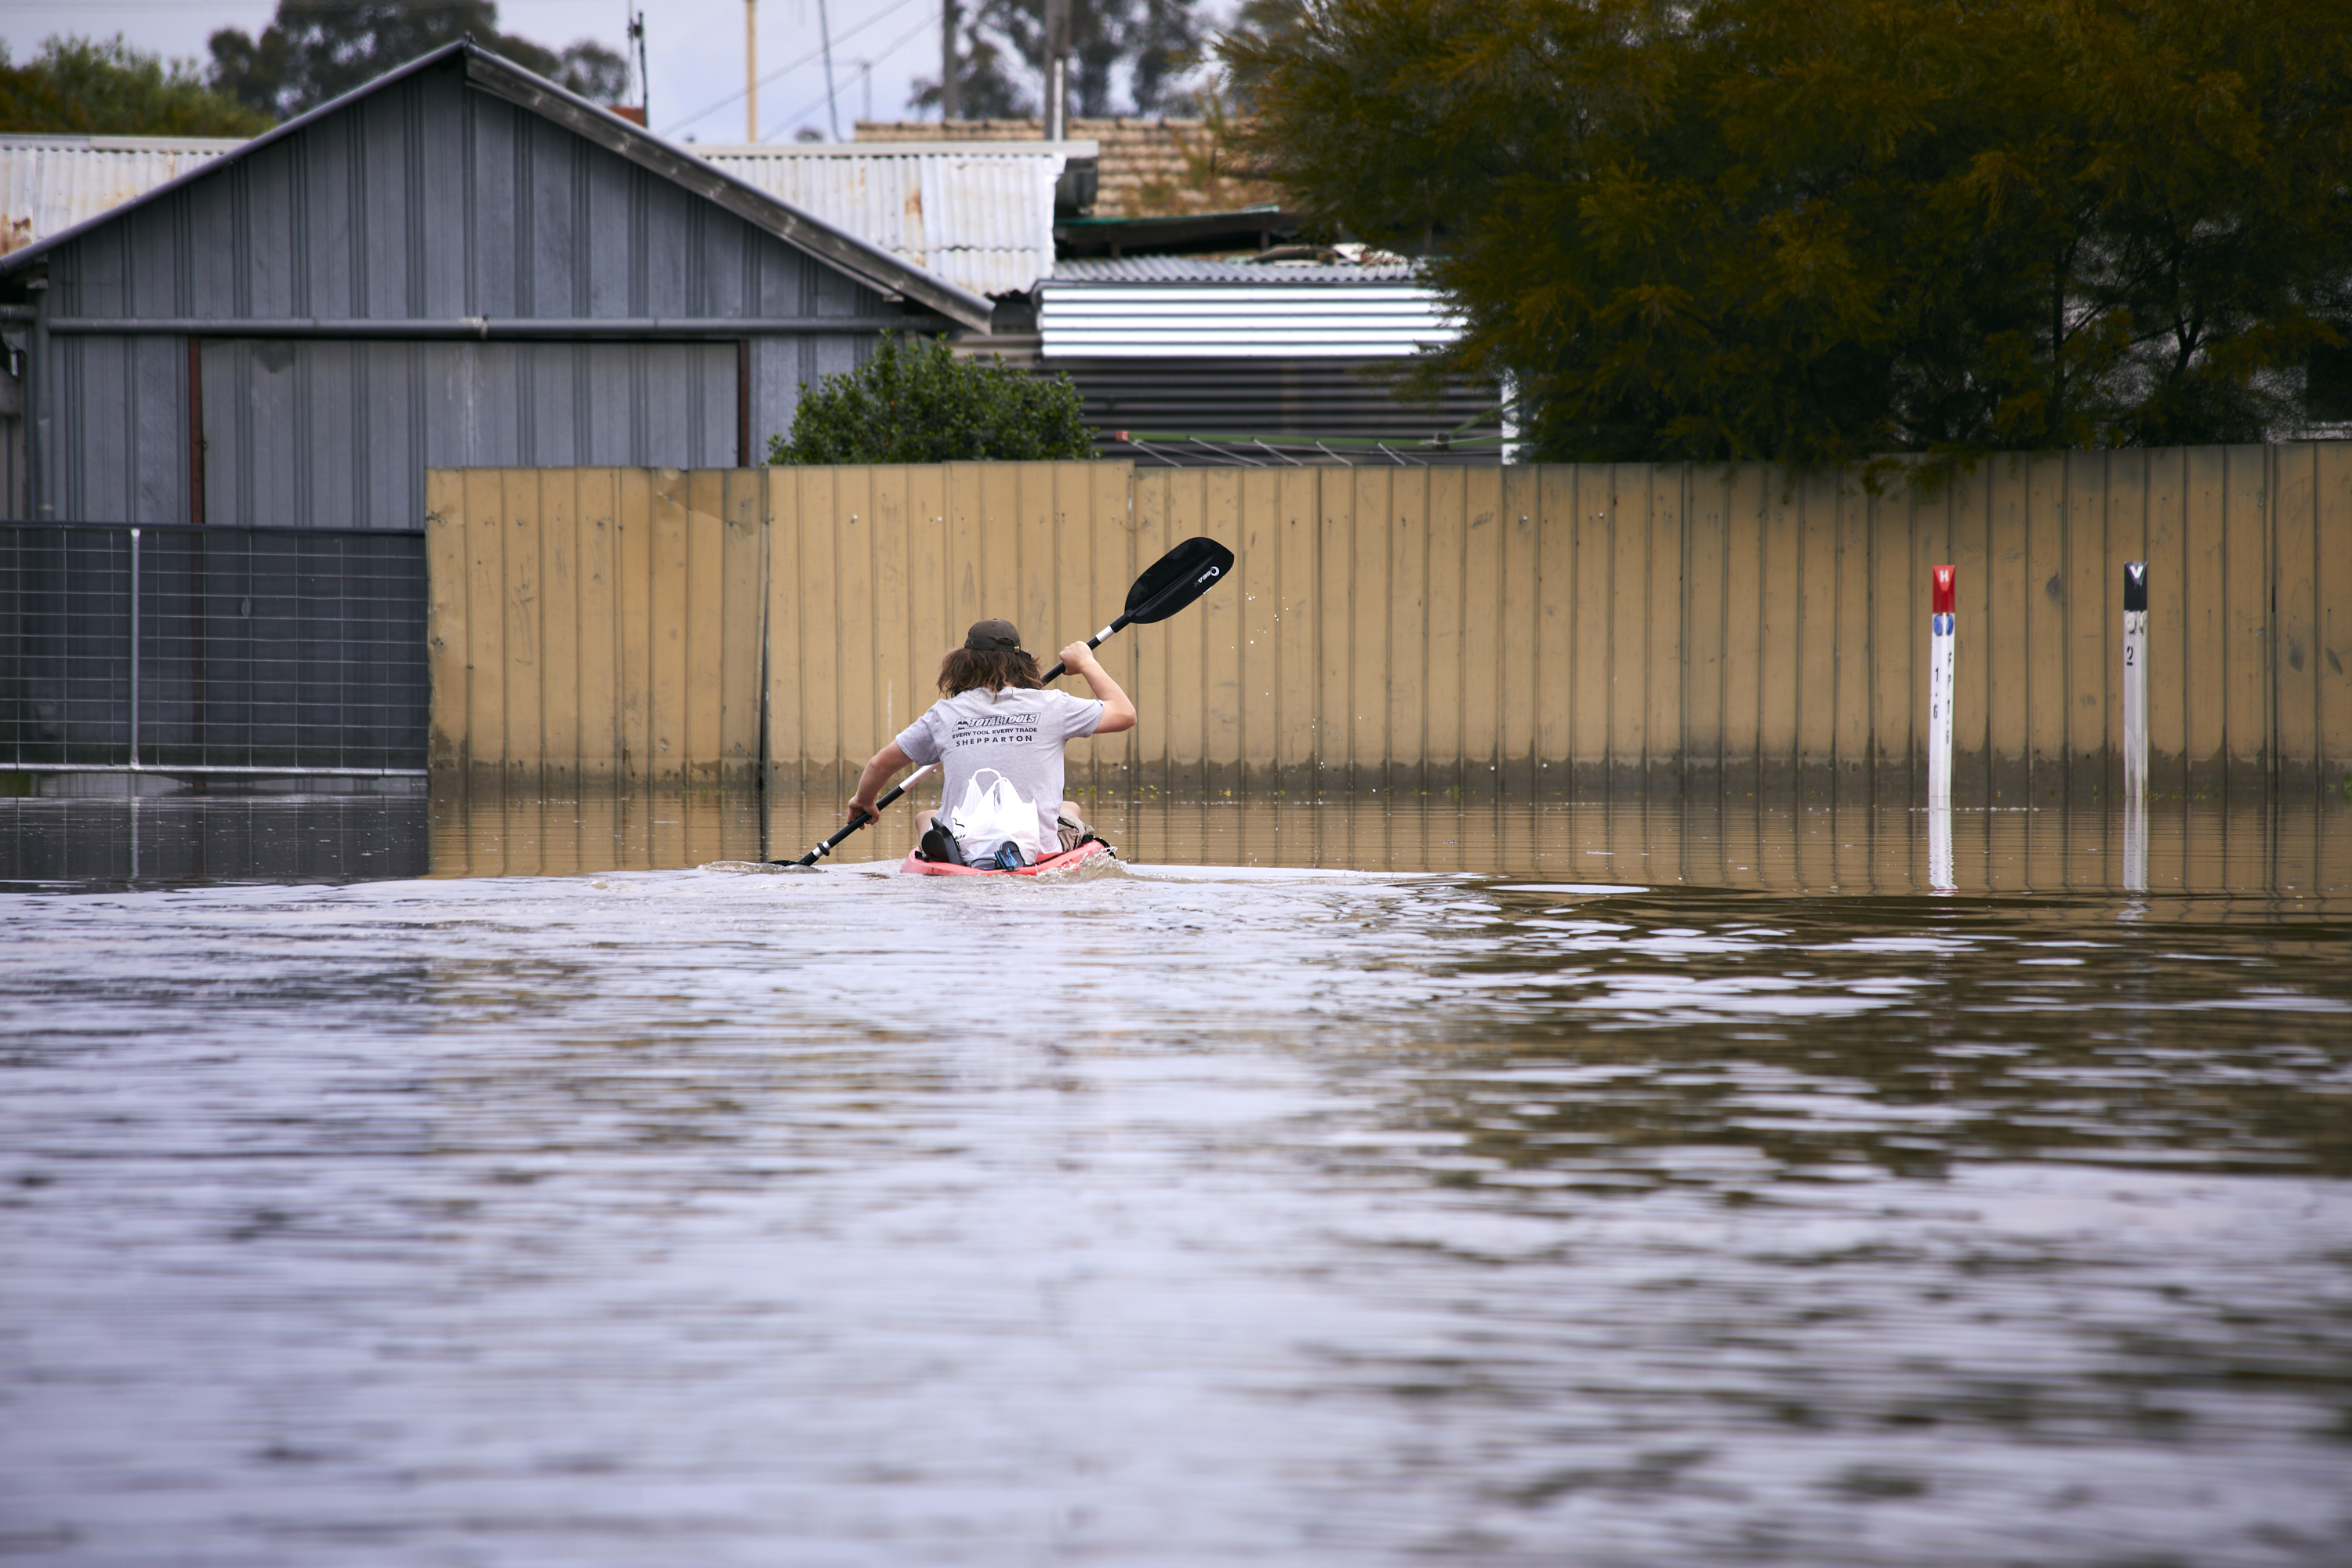 Bodi Fitzsimmons kayaking down the street during the floods in Shepparton, Victoria.